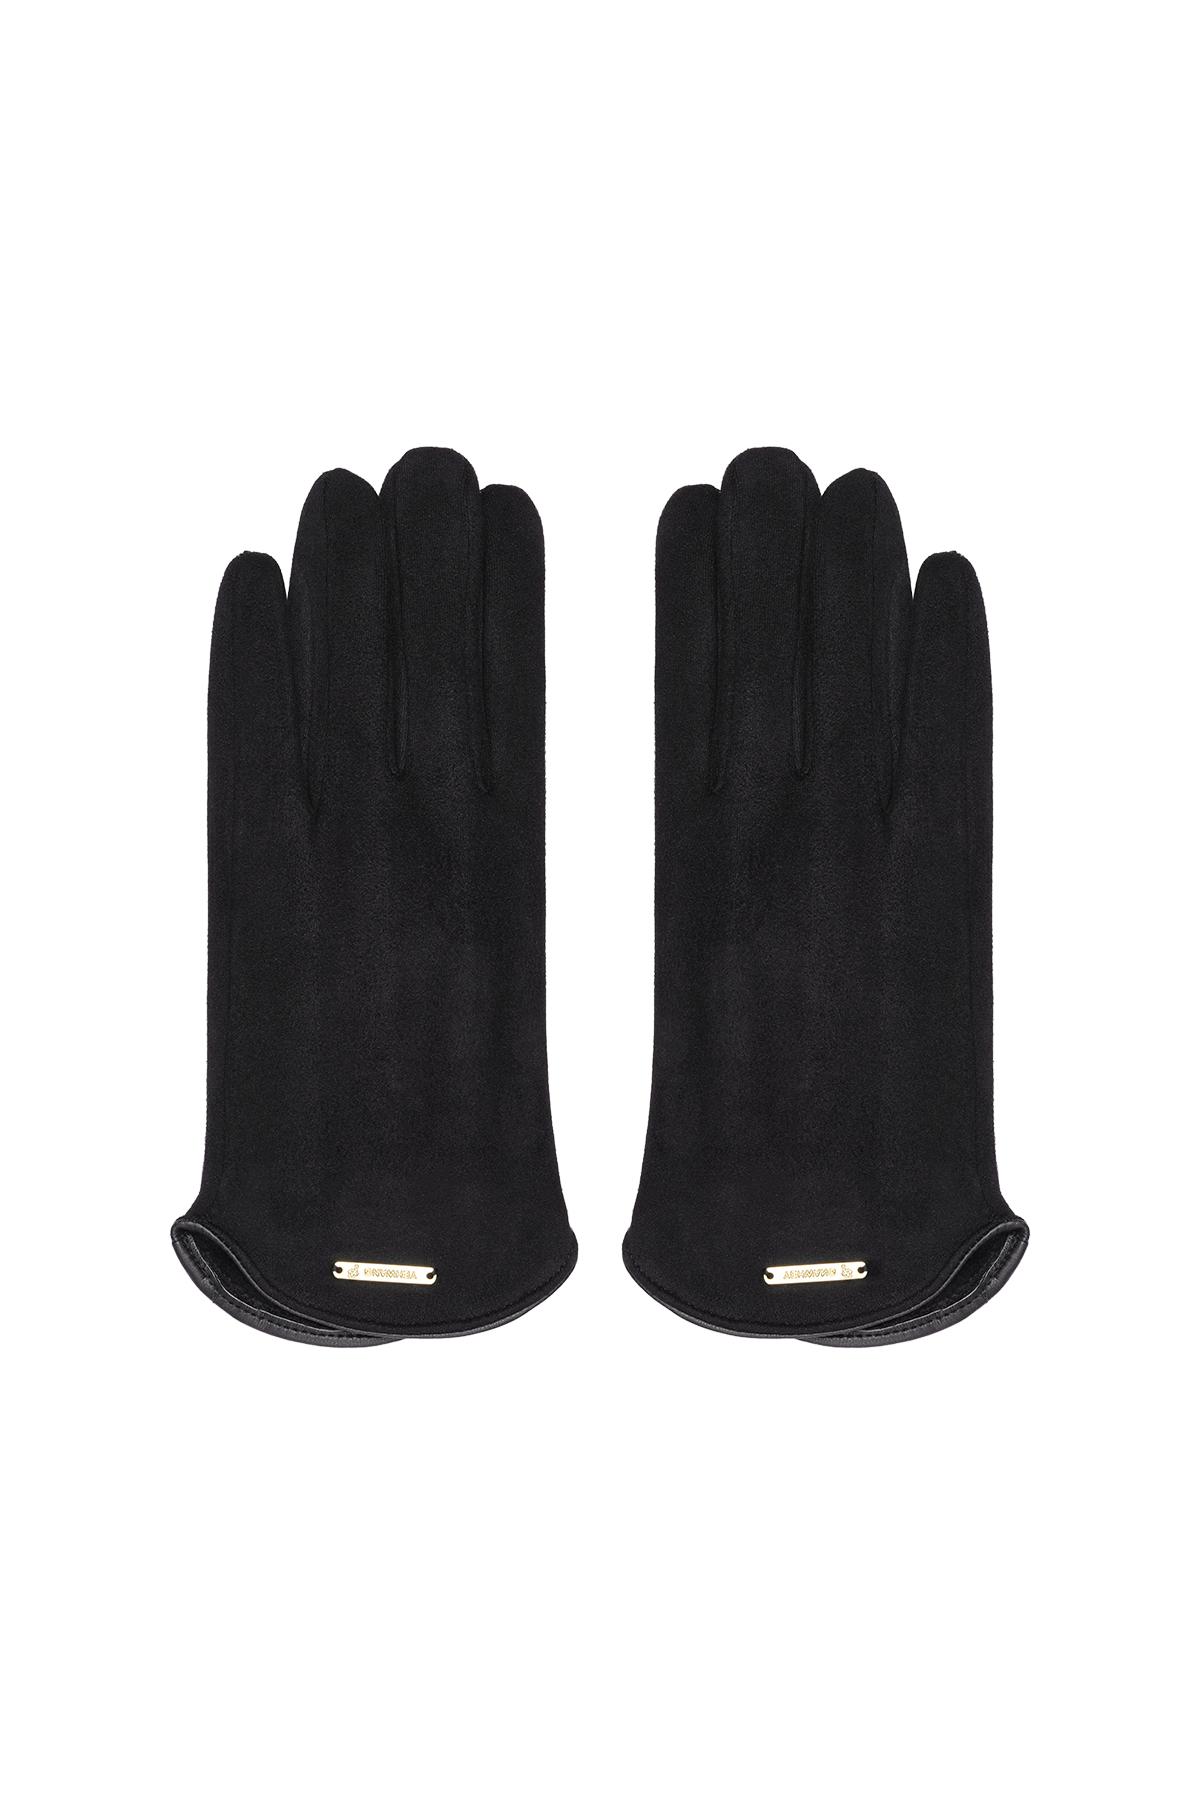 Classic gloves black Polyester One size h5 